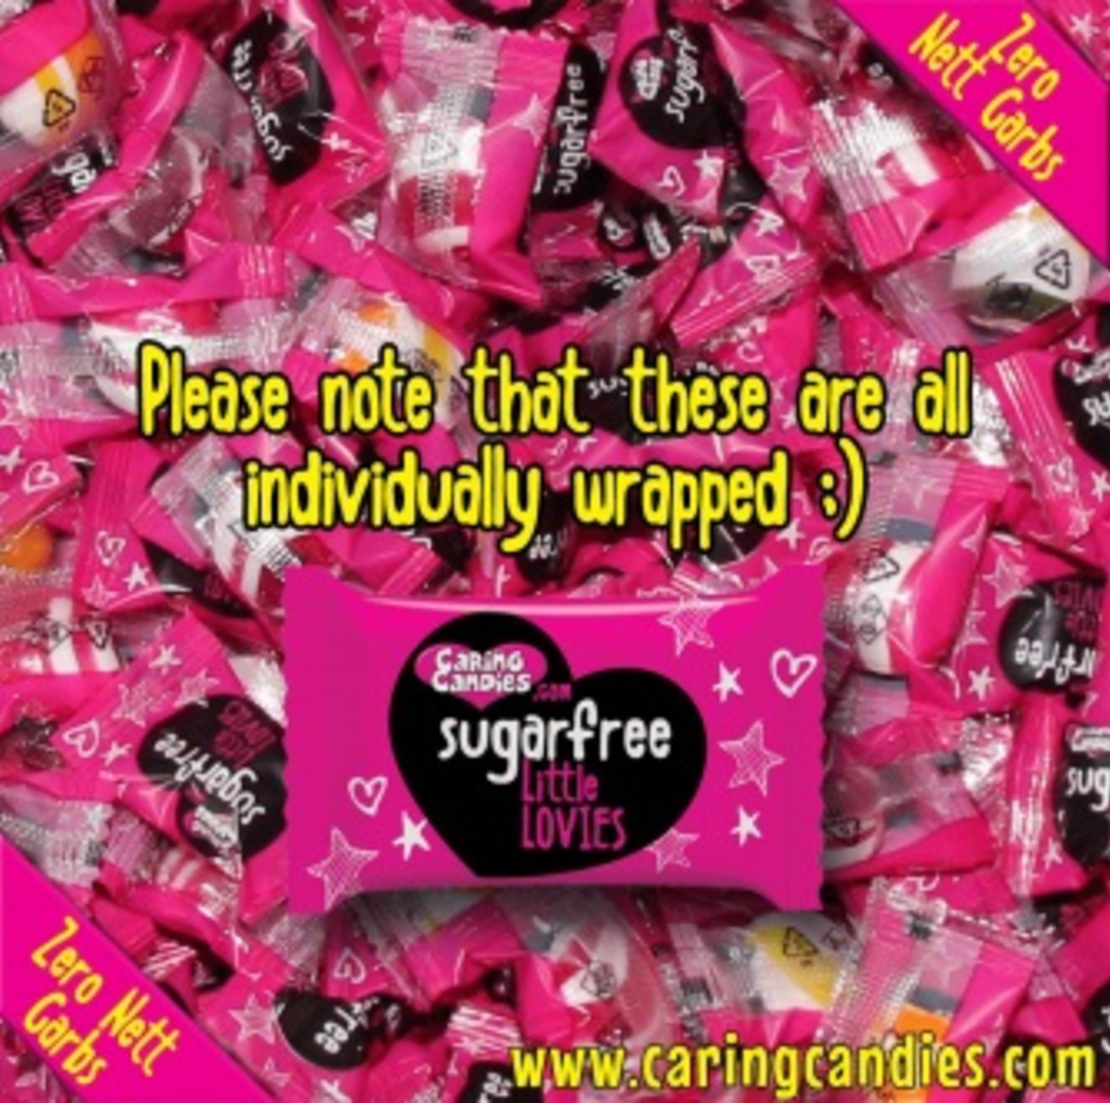 Caring Candies Little Lovies Fruits 100g or 1 kg